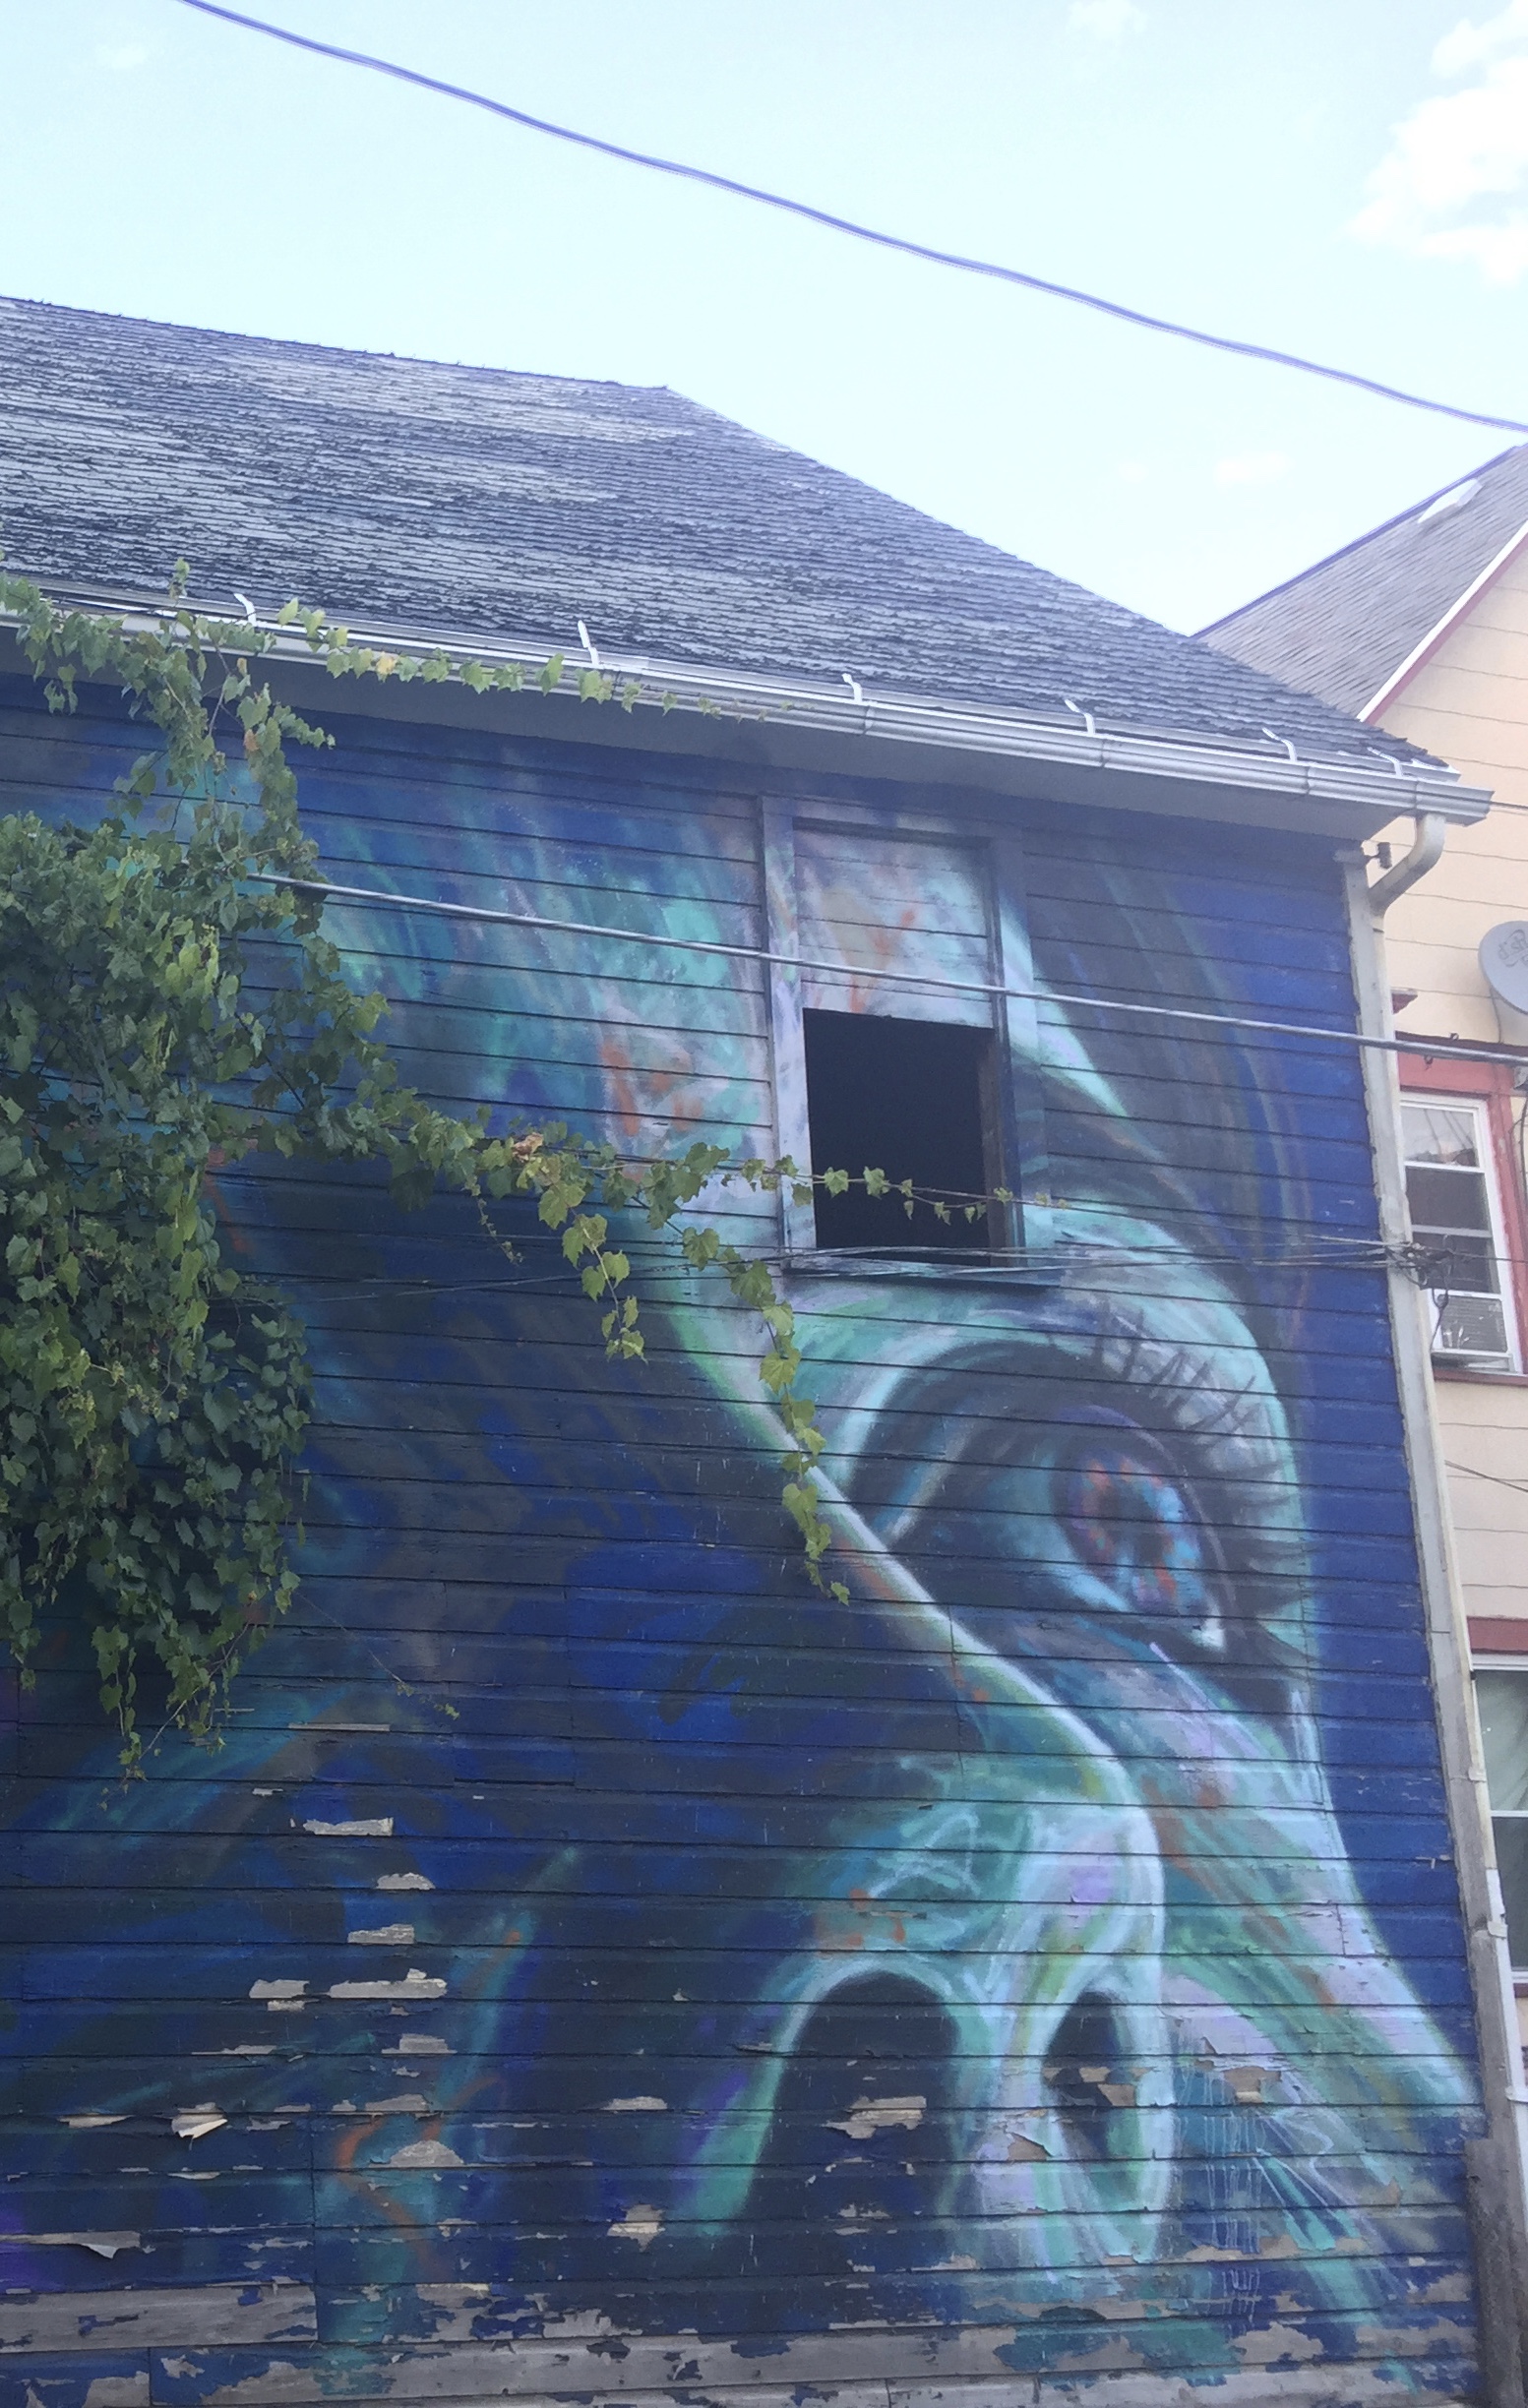 mural of woman's face on the side of a house in shades of blue and green